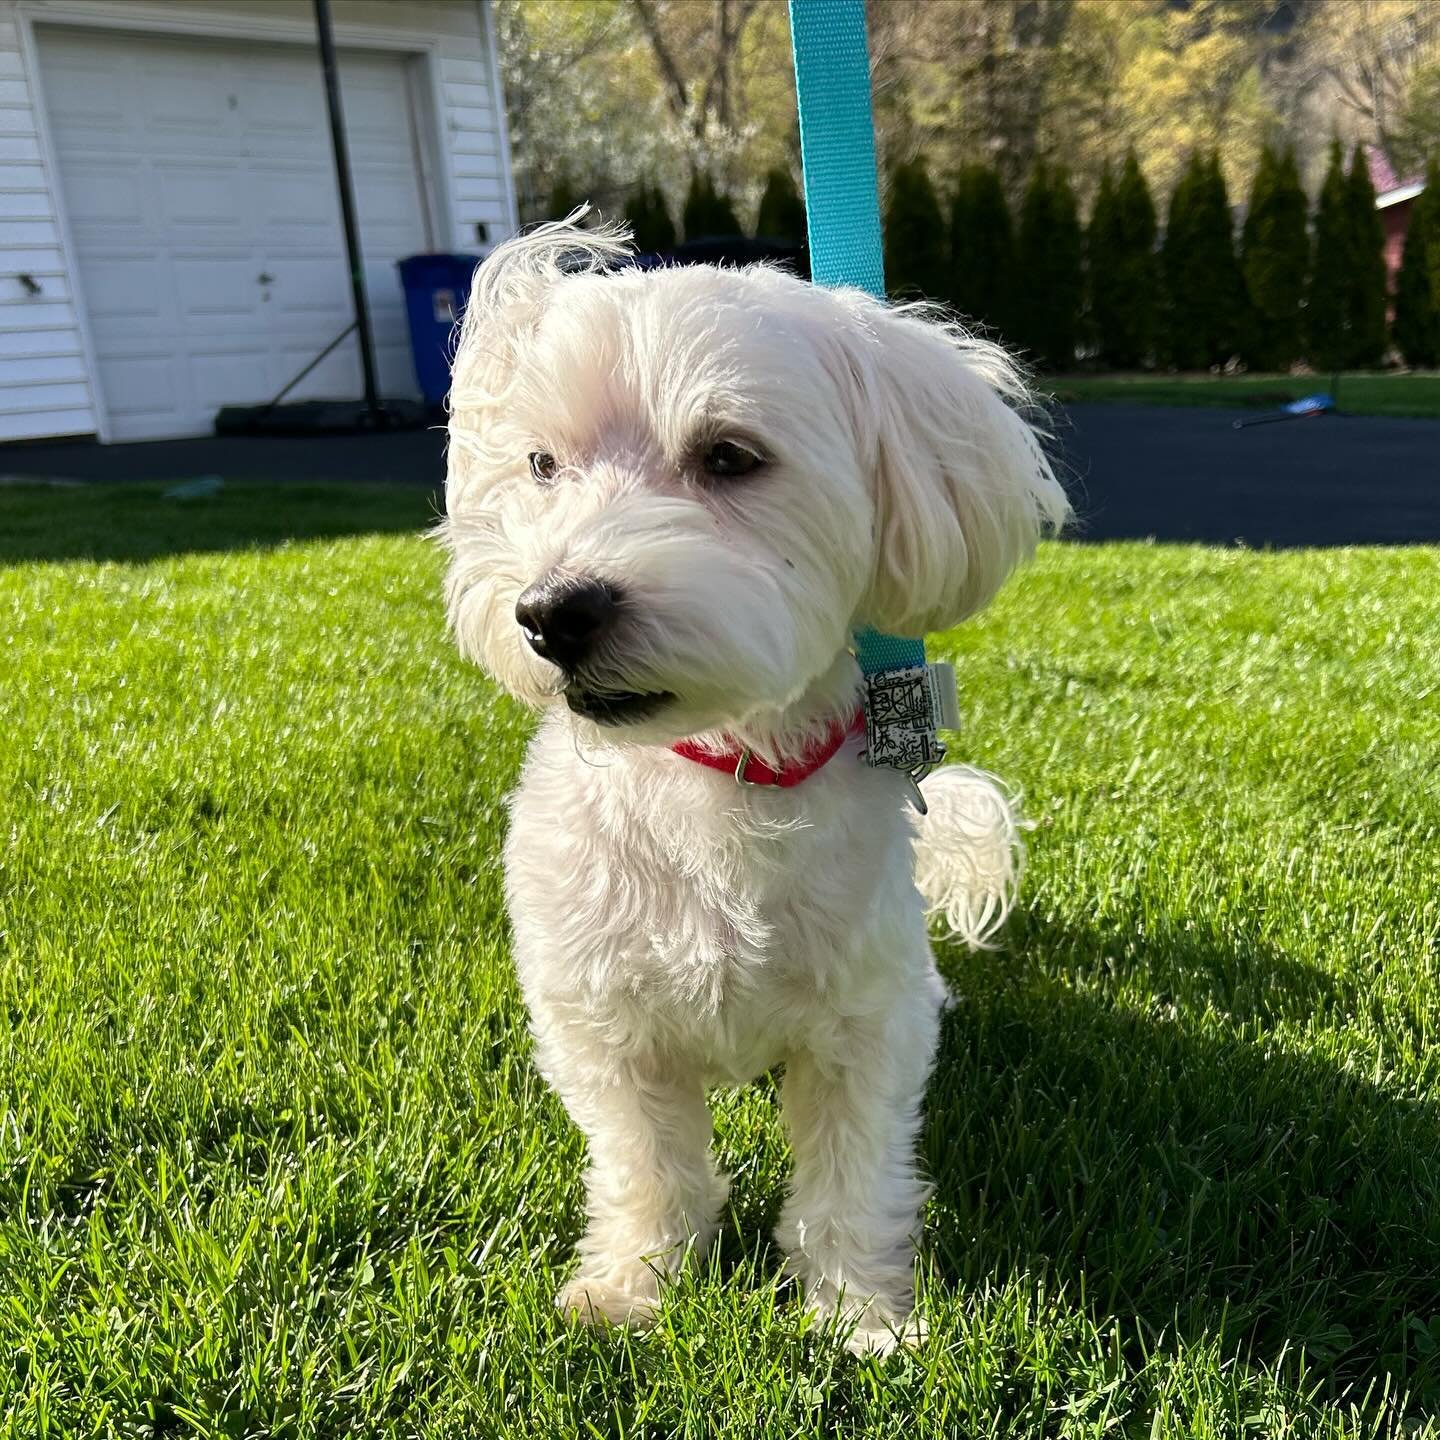 Meet the beary handsome Teddy. This adorable 7-10 year old Maltipoo (our best guess!) is a true sweetheart who adores his humans and thrives on companionship. Teddy walks perfectly on a leash, making walks with him the best part of your day. He is mo